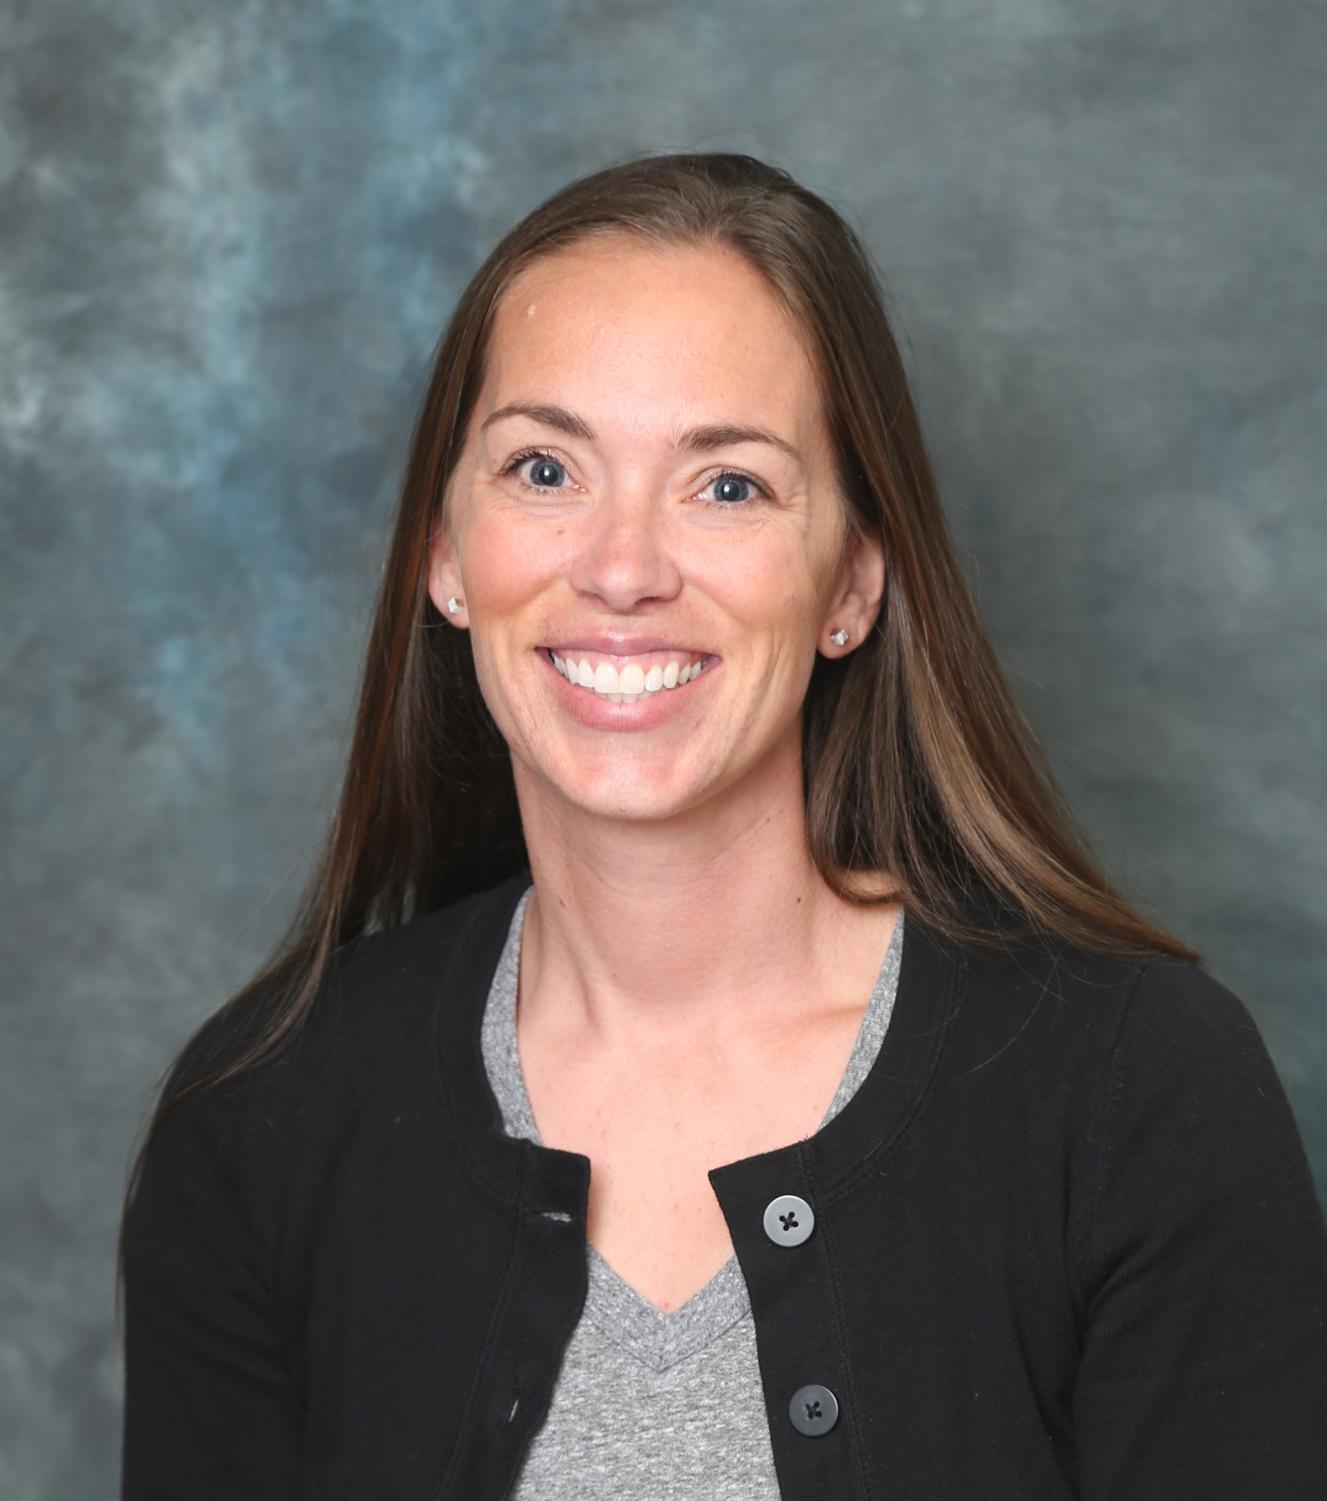 Meghan Hein the new District 4 Director. Picture provided by Central Kitsap School Board.